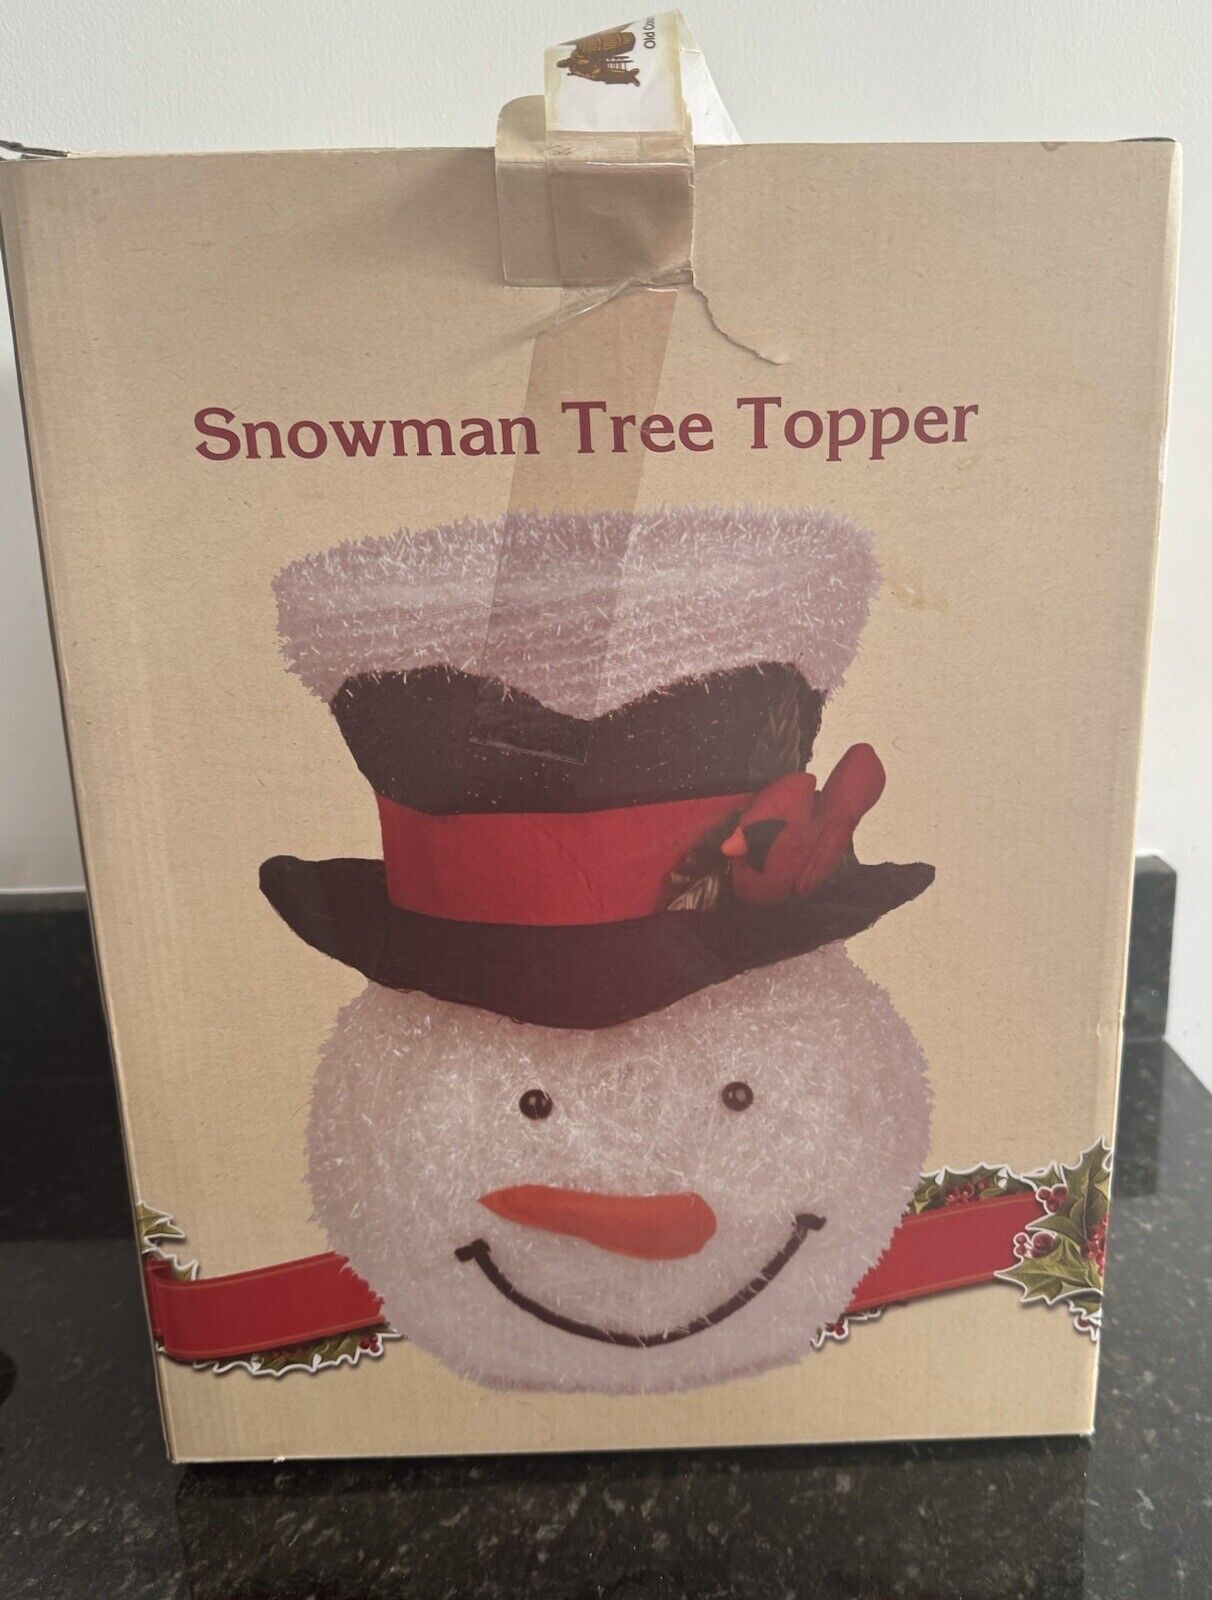 Cracker Barrel Snowman 18” Christmas Tree Topper with Box - Hard To Find